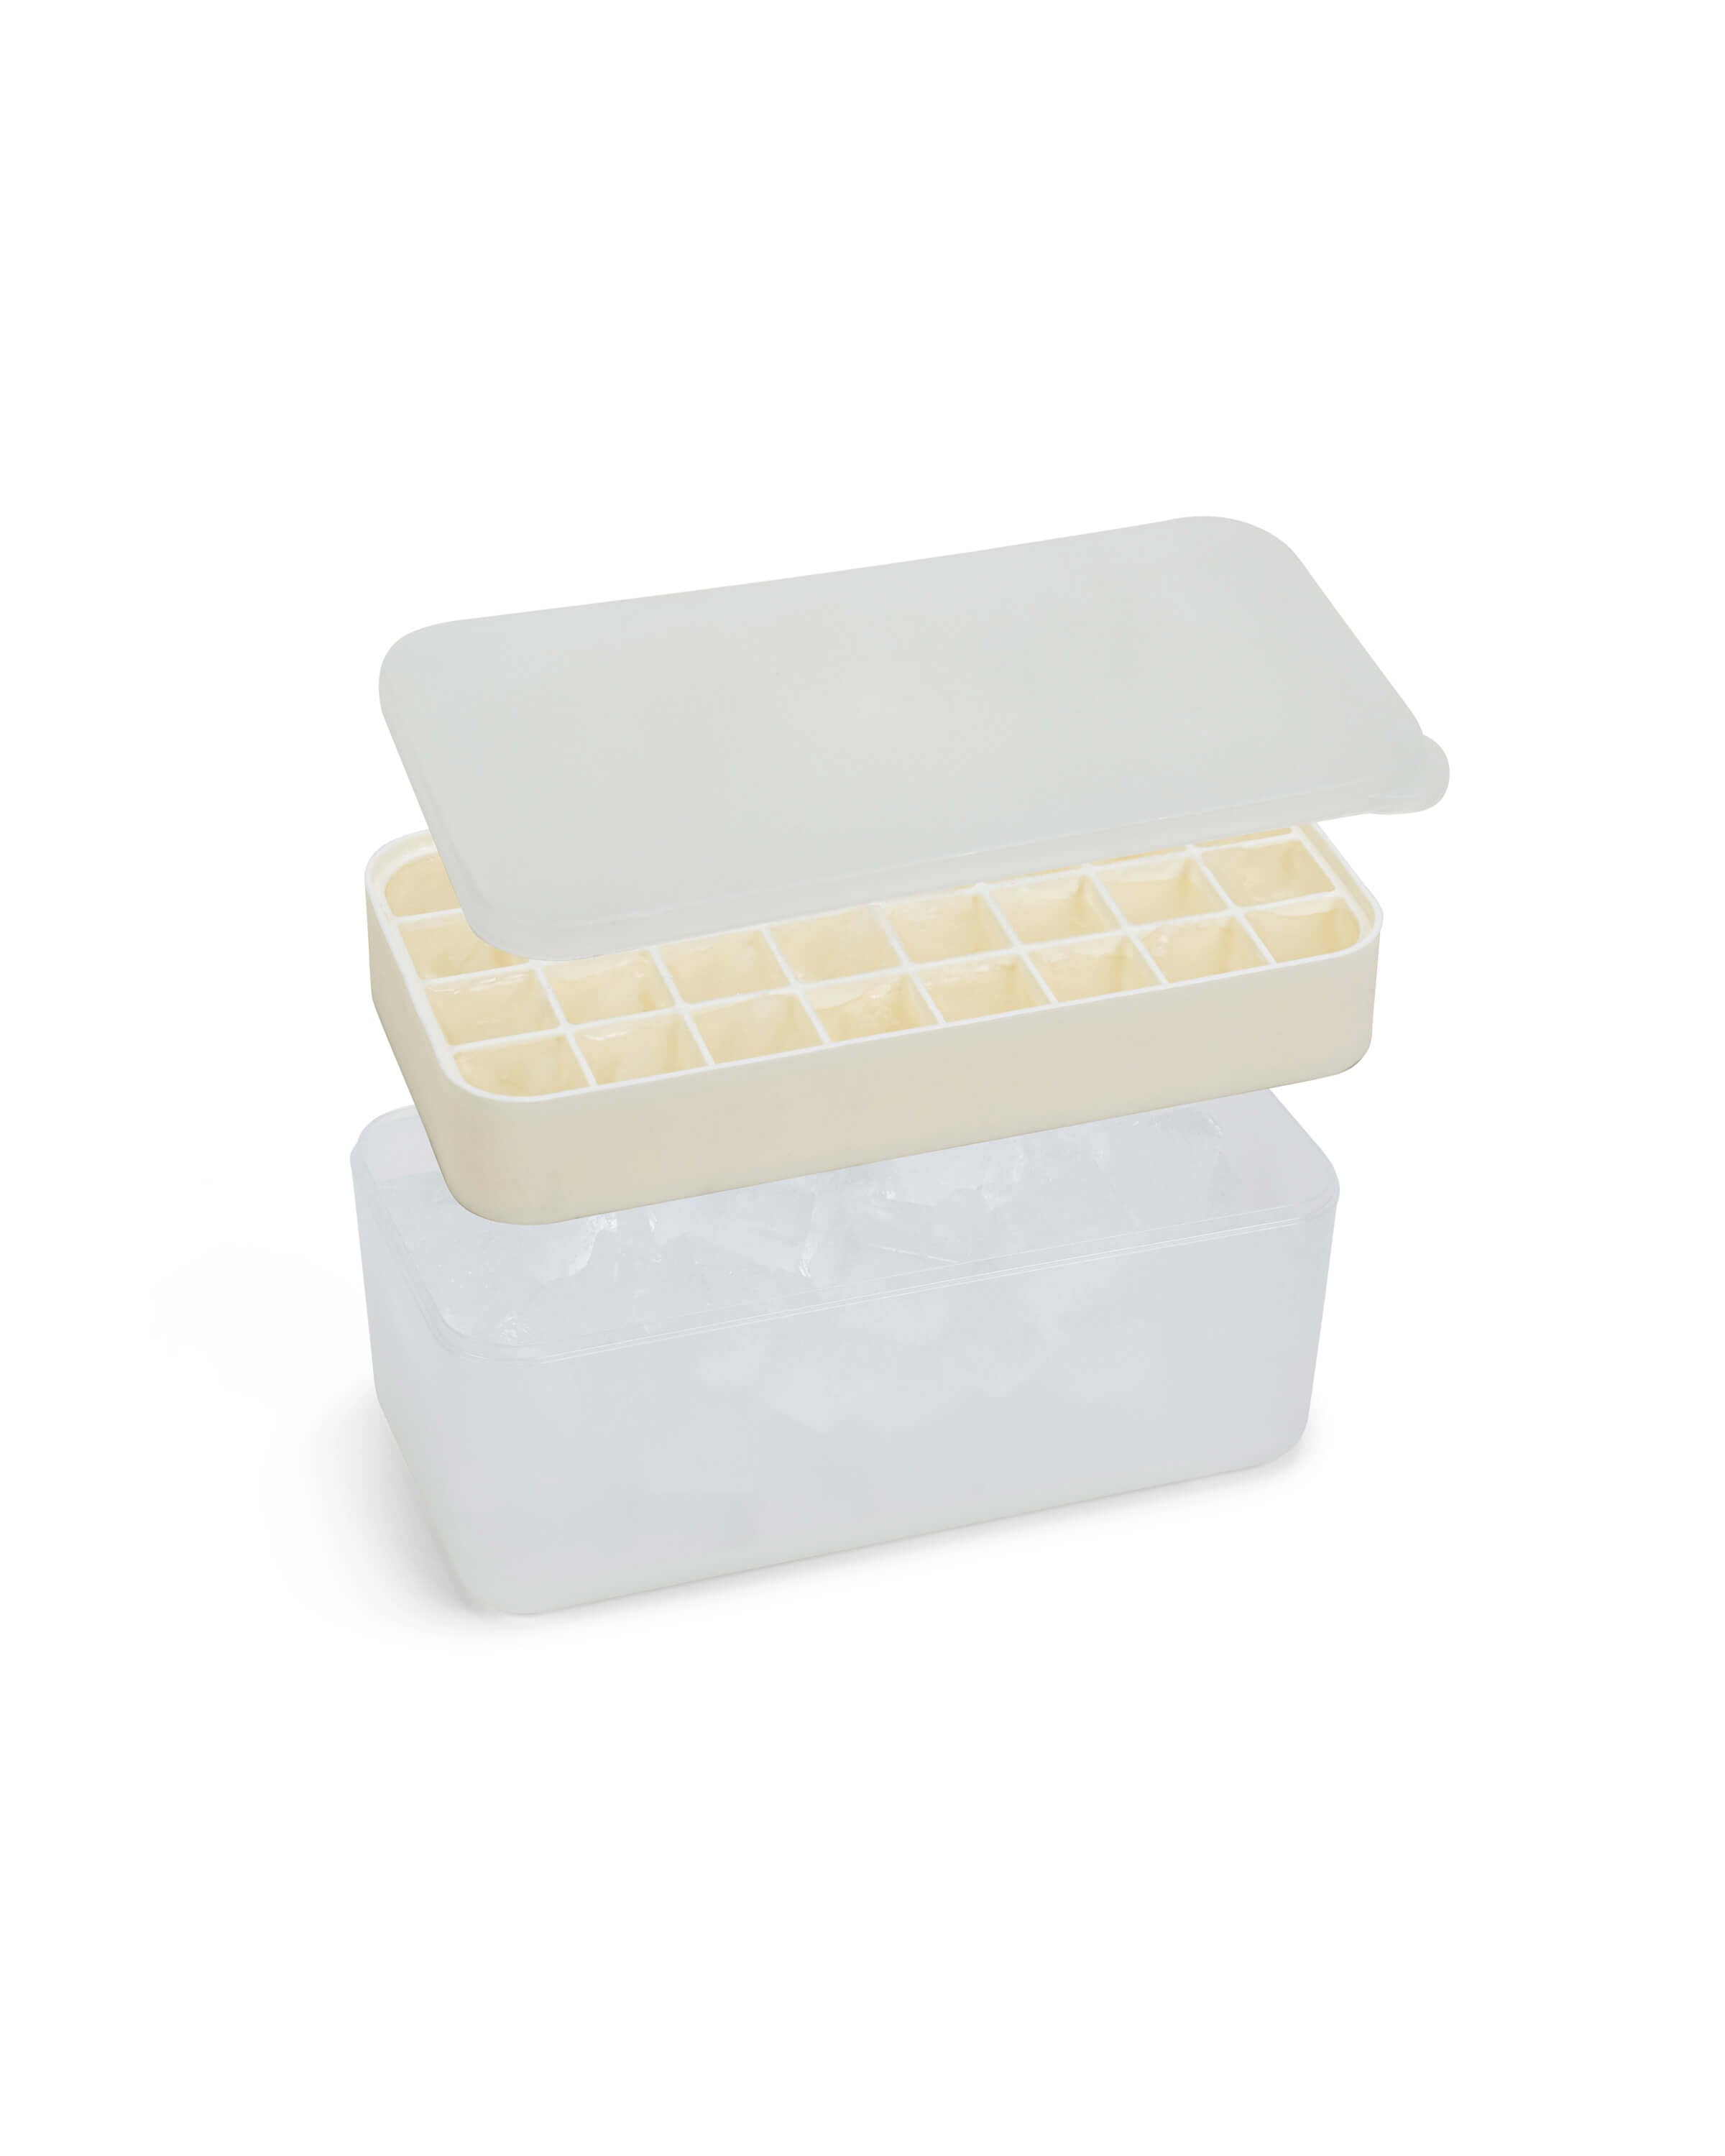 W&P Design Co Crushed Ice Tray